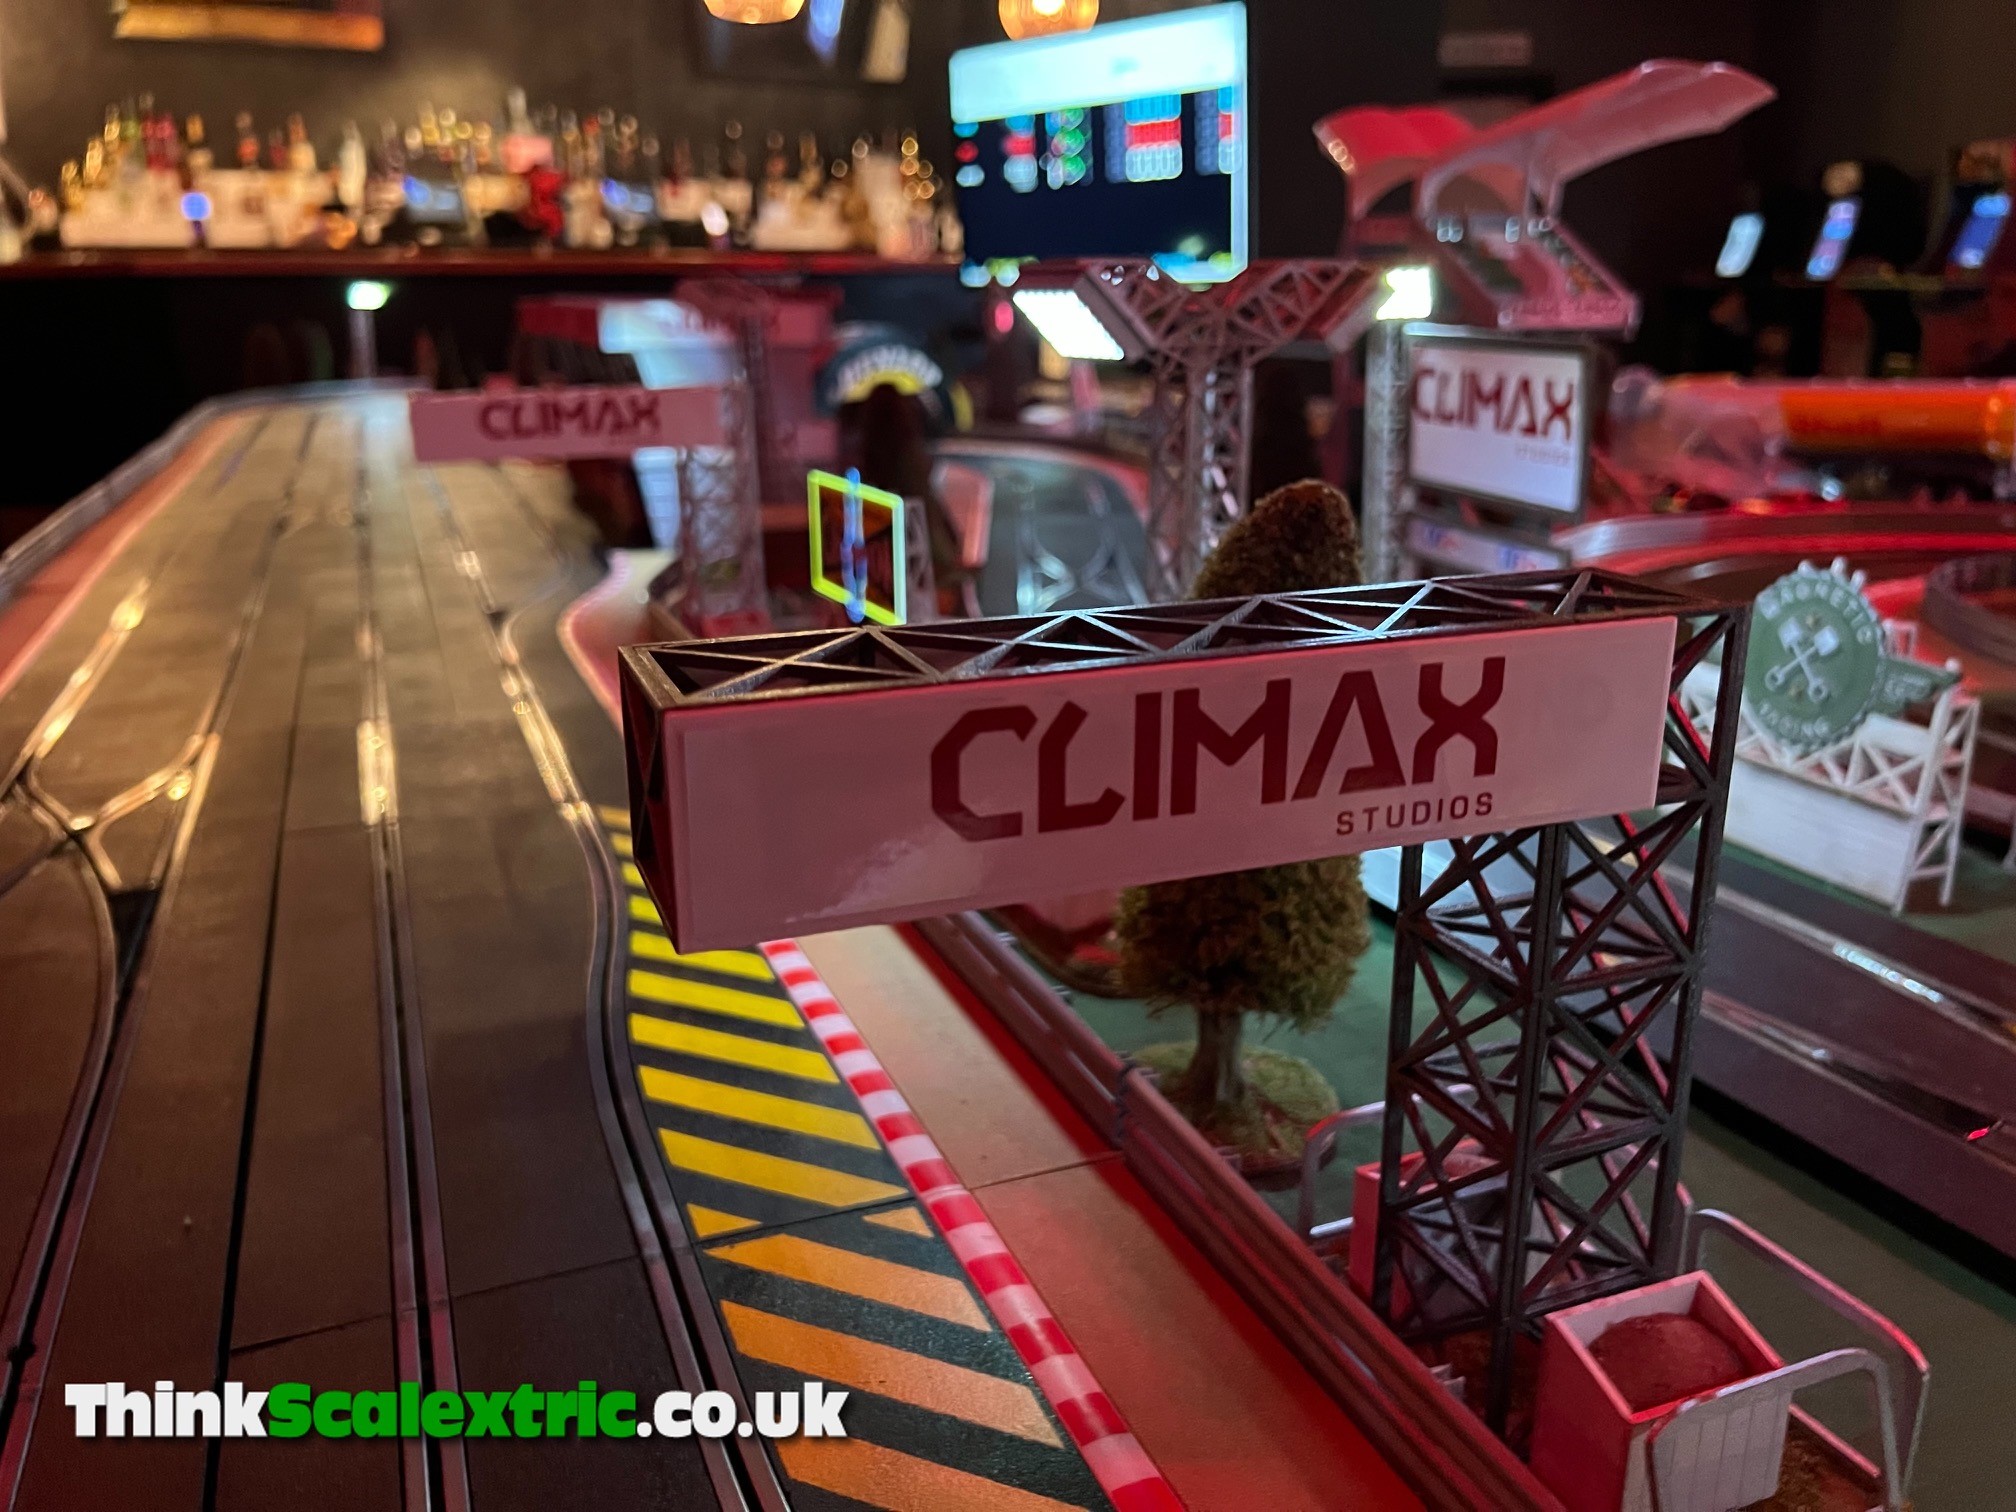 climax studios at eden portsmouth scalextric hire event